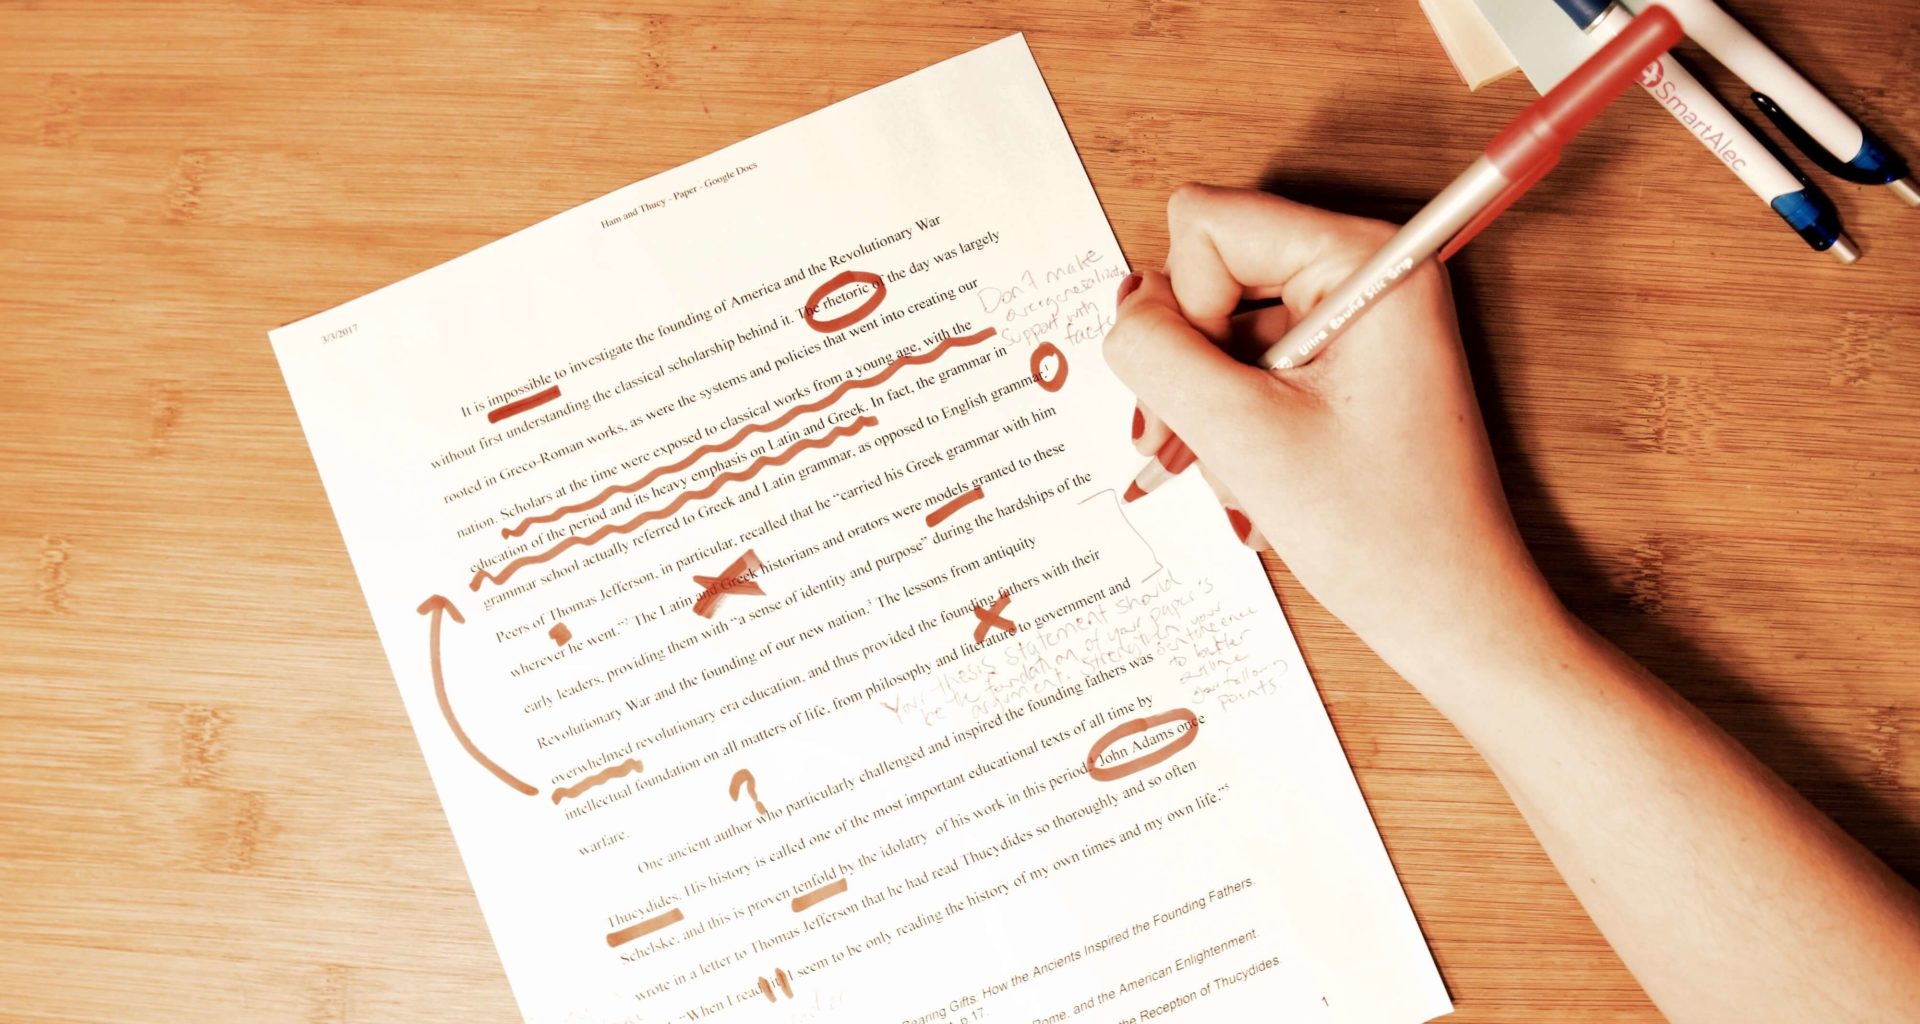 Most Prominent Online Tools to Master the Art of Essay Writing - Gadget